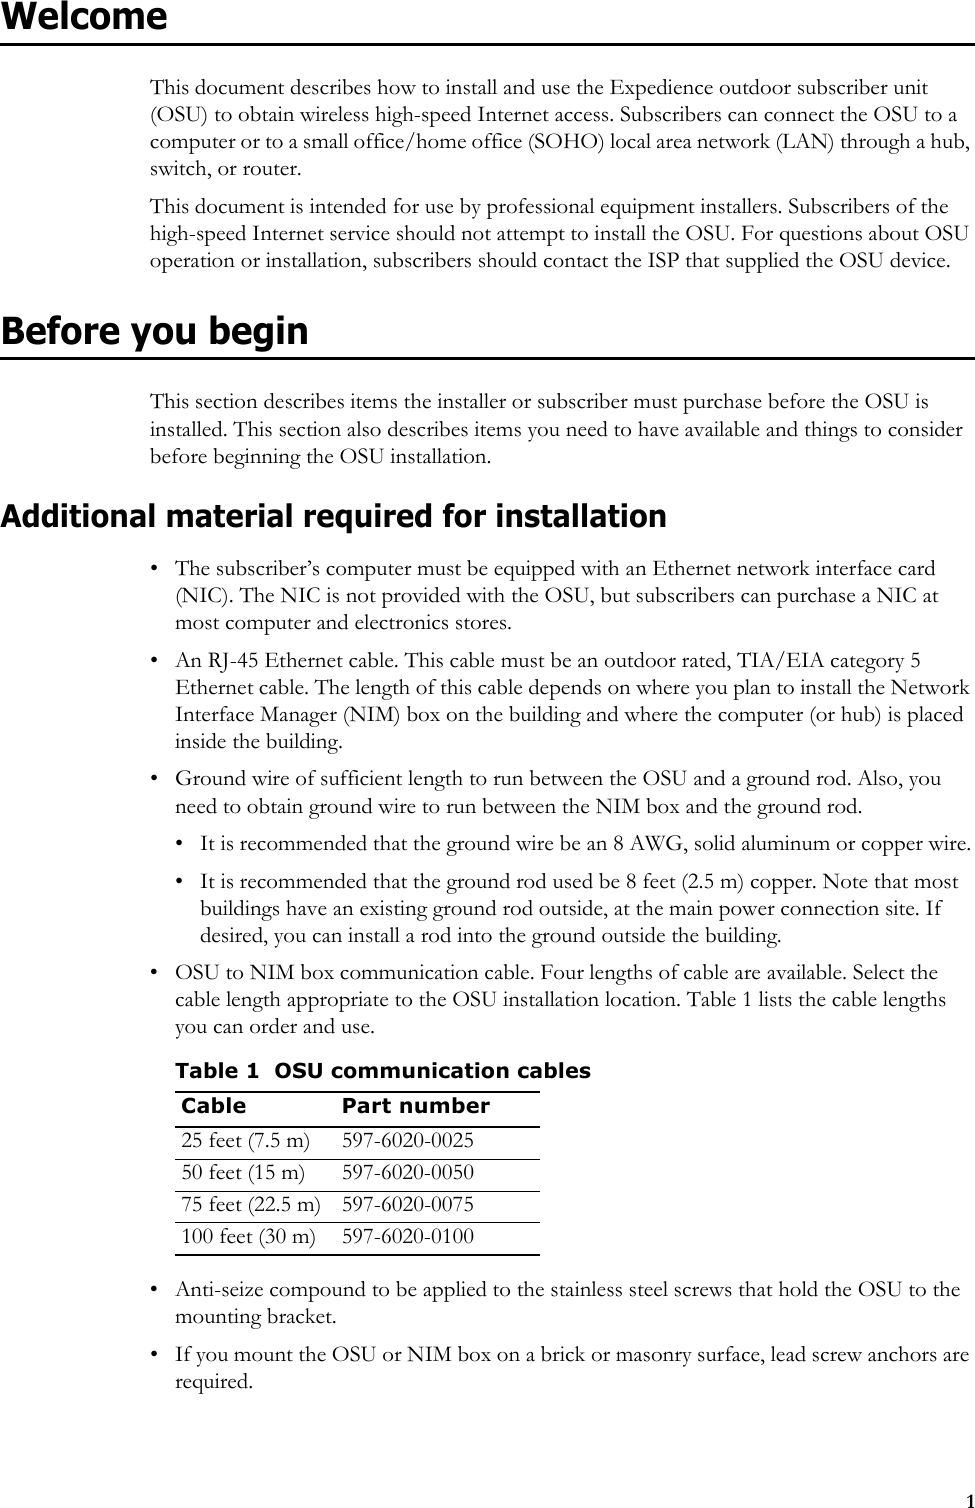 1WelcomeThis document describes how to install and use the Expedience outdoor subscriber unit (OSU) to obtain wireless high-speed Internet access. Subscribers can connect the OSU to a computer or to a small office/home office (SOHO) local area network (LAN) through a hub, switch, or router.This document is intended for use by professional equipment installers. Subscribers of the high-speed Internet service should not attempt to install the OSU. For questions about OSU operation or installation, subscribers should contact the ISP that supplied the OSU device. Before you beginThis section describes items the installer or subscriber must purchase before the OSU is installed. This section also describes items you need to have available and things to consider before beginning the OSU installation.Additional material required for installation• The subscriber’s computer must be equipped with an Ethernet network interface card (NIC). The NIC is not provided with the OSU, but subscribers can purchase a NIC at most computer and electronics stores.• An RJ-45 Ethernet cable. This cable must be an outdoor rated, TIA/EIA category 5 Ethernet cable. The length of this cable depends on where you plan to install the Network Interface Manager (NIM) box on the building and where the computer (or hub) is placed inside the building.• Ground wire of sufficient length to run between the OSU and a ground rod. Also, you need to obtain ground wire to run between the NIM box and the ground rod.• It is recommended that the ground wire be an 8 AWG, solid aluminum or copper wire.• It is recommended that the ground rod used be 8 feet (2.5 m) copper. Note that most buildings have an existing ground rod outside, at the main power connection site. If desired, you can install a rod into the ground outside the building. • OSU to NIM box communication cable. Four lengths of cable are available. Select the cable length appropriate to the OSU installation location. Table 1 lists the cable lengths you can order and use.• Anti-seize compound to be applied to the stainless steel screws that hold the OSU to the mounting bracket.• If you mount the OSU or NIM box on a brick or masonry surface, lead screw anchors are required. Table 1 OSU communication cablesCable Part number25 feet (7.5 m) 597-6020-002550 feet (15 m) 597-6020-005075 feet (22.5 m) 597-6020-0075100 feet (30 m) 597-6020-0100